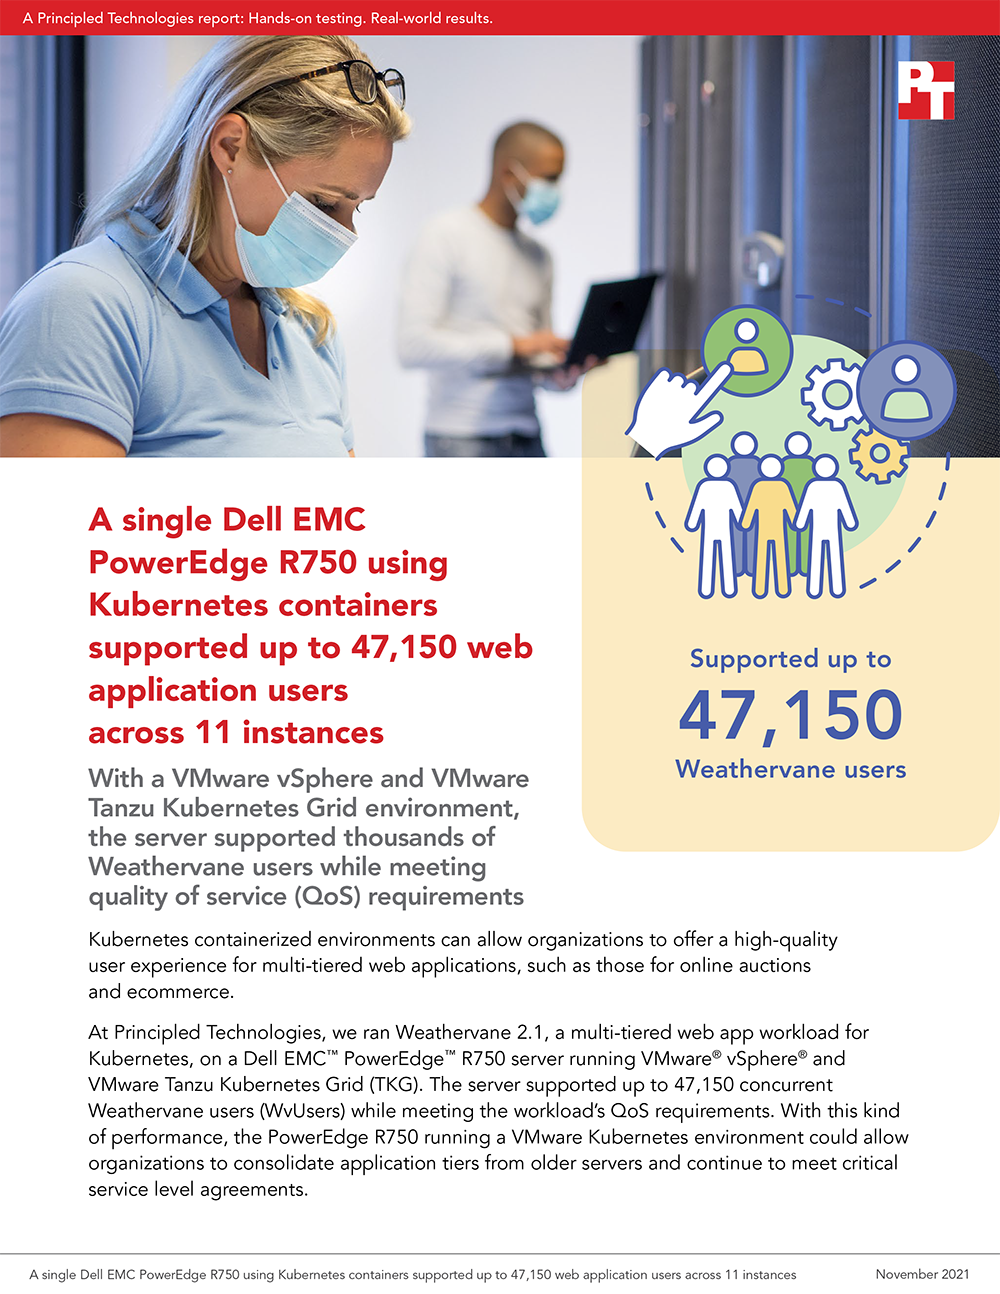 Principled Technologies Finds That a Single Dell EMC PowerEdge R750 Server with Kubernetes Containers Can Support Up to 47,150 Web App Users